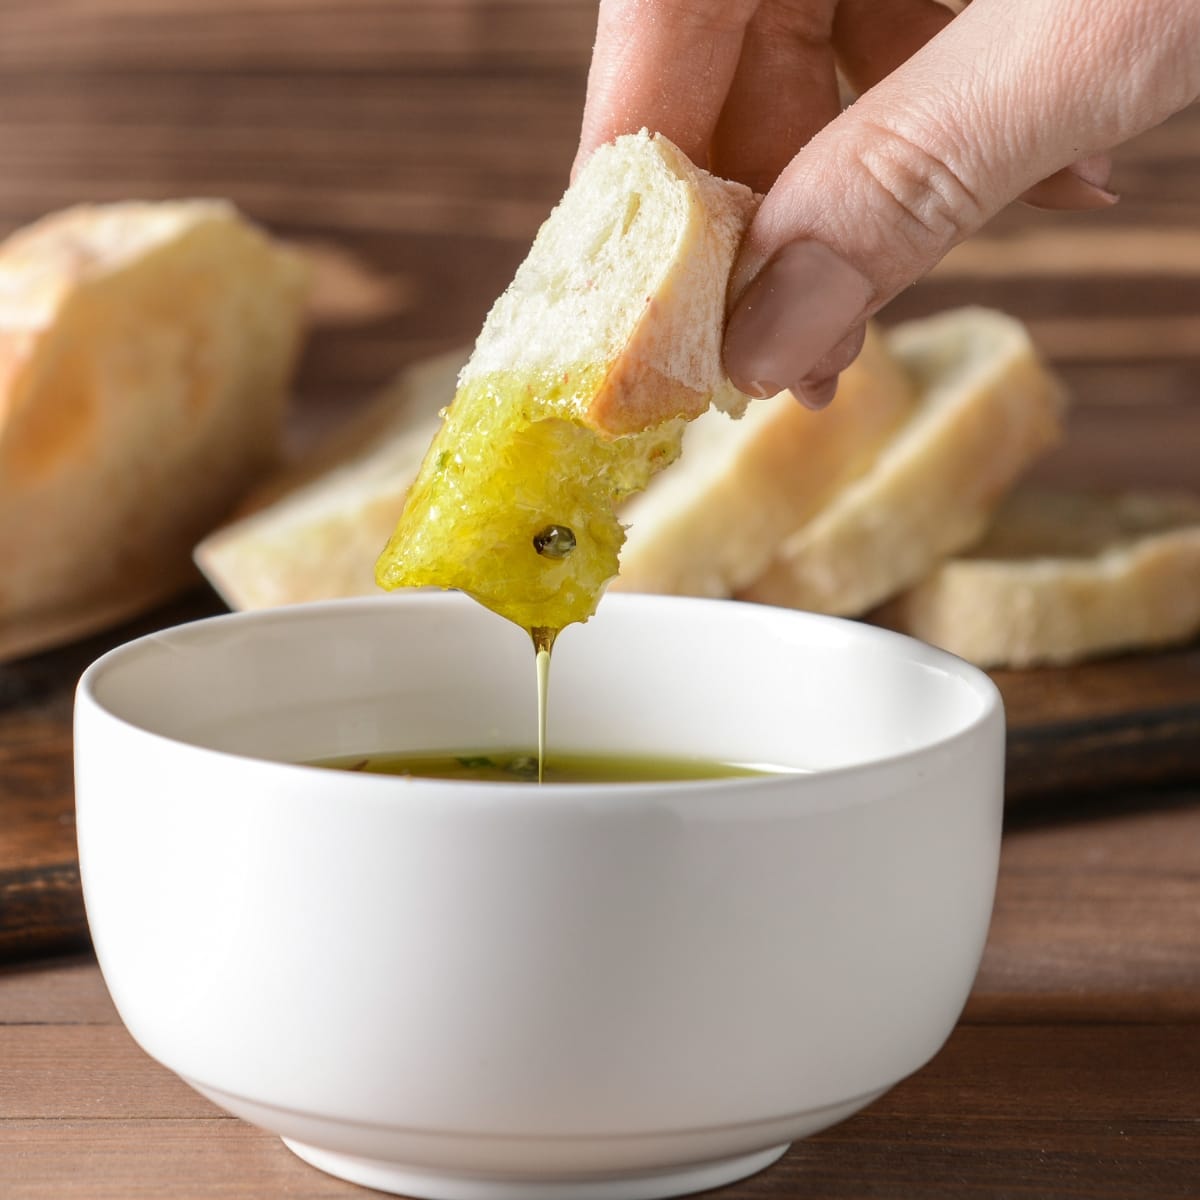 Bread Dipped to a Extra Virgin Olive Oil Dippings